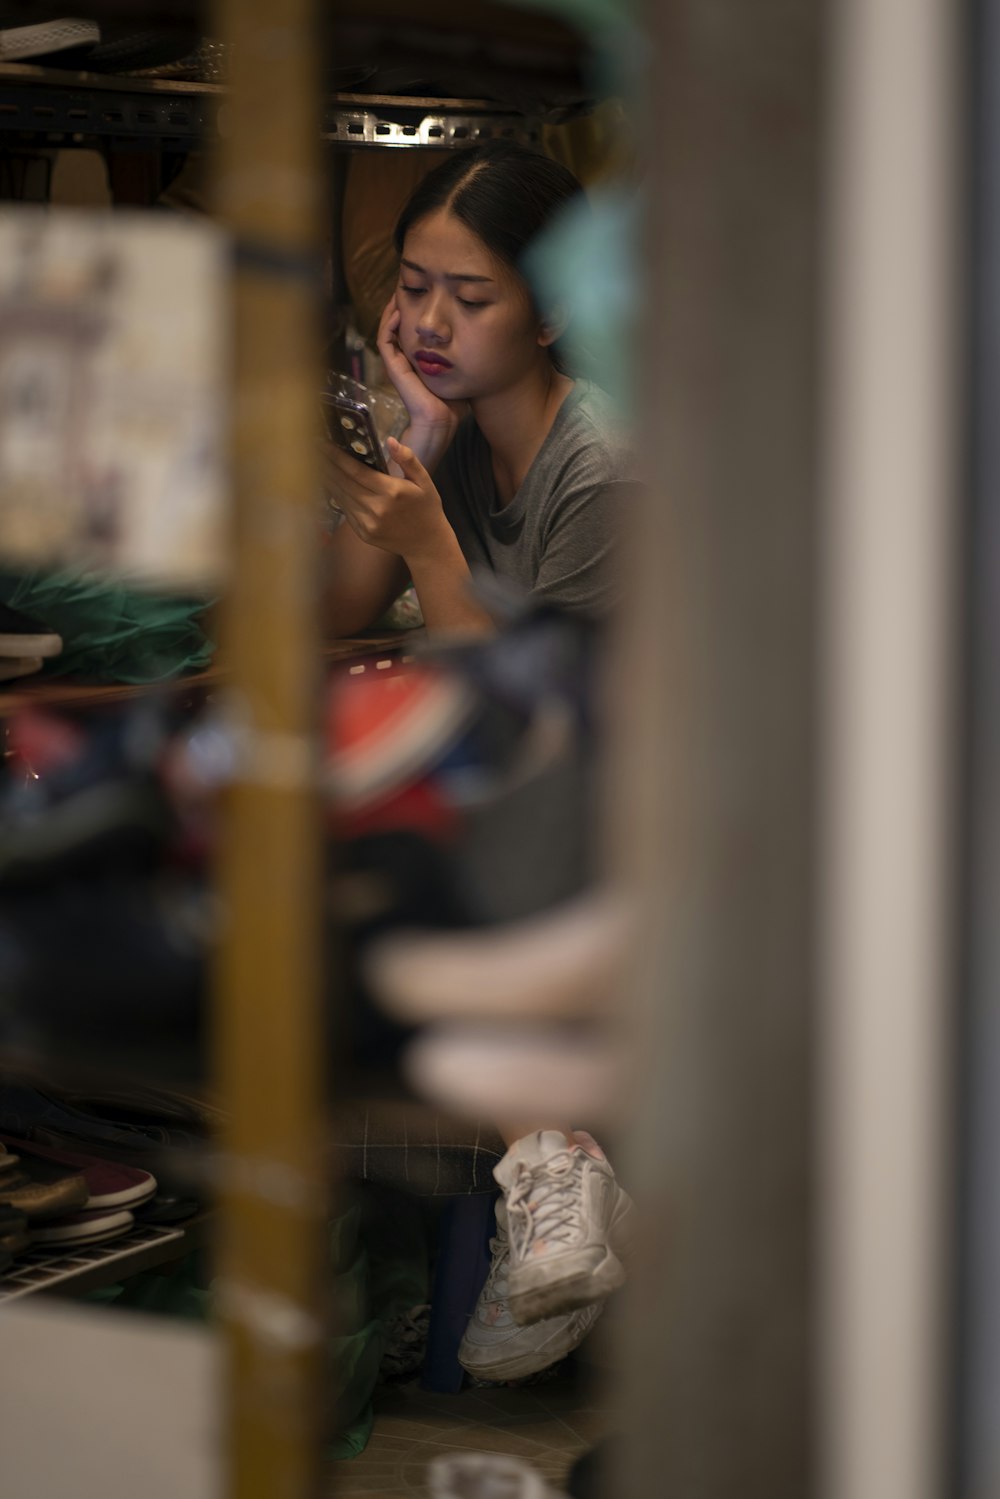 a woman sitting on the floor looking at her cell phone